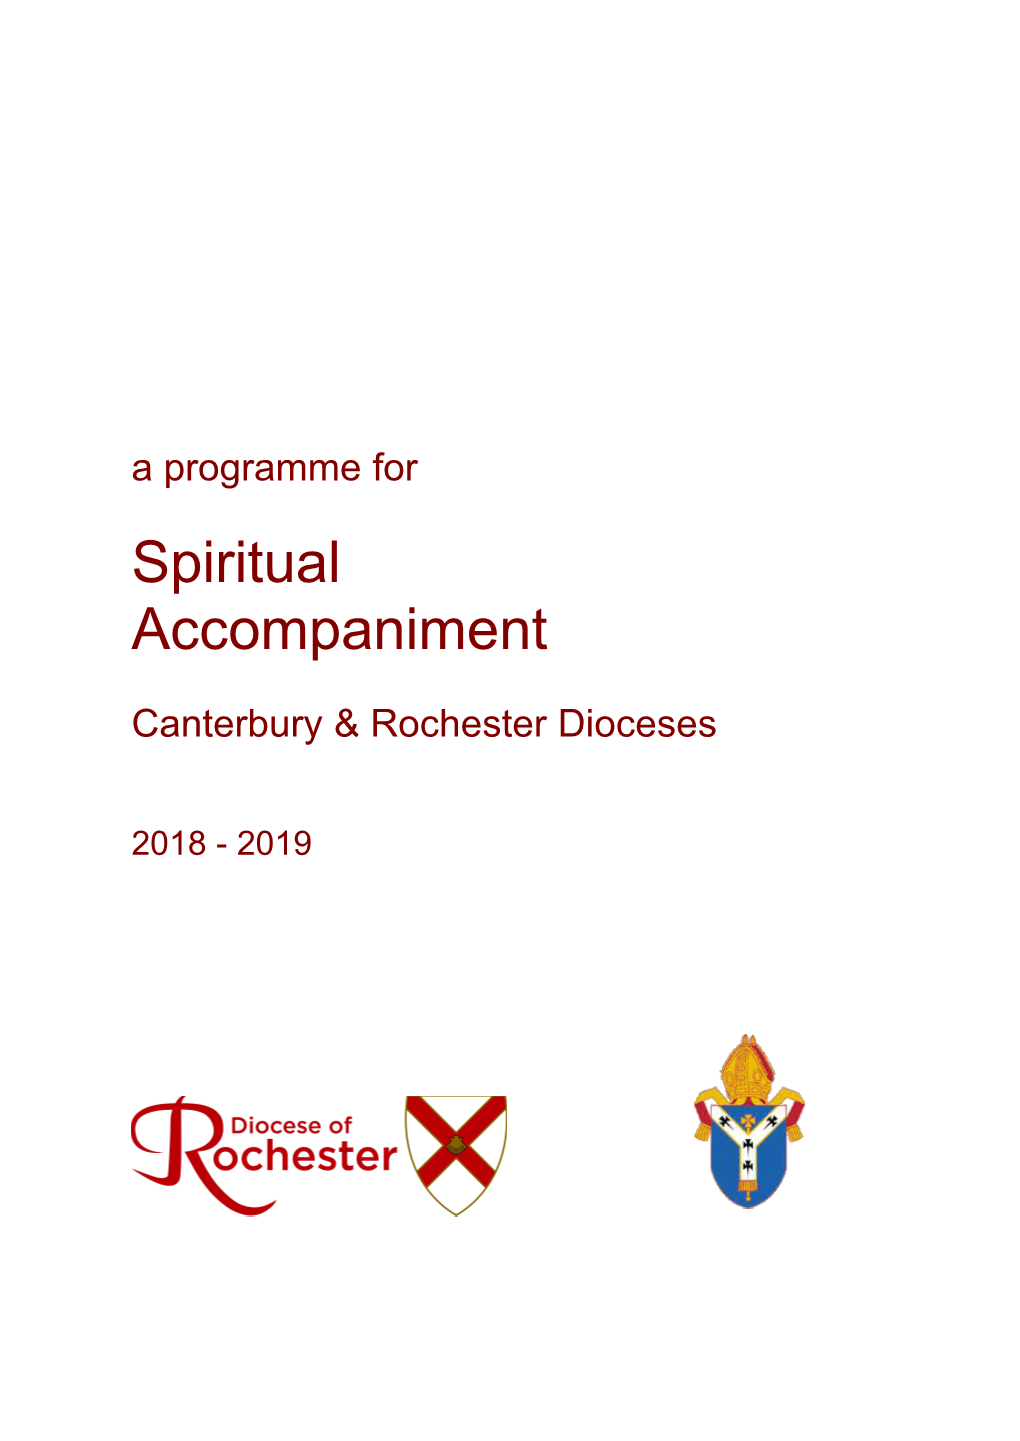 There Is a Discerned Need in Both Canterbury and Rochester Dioceses to Support Ordained